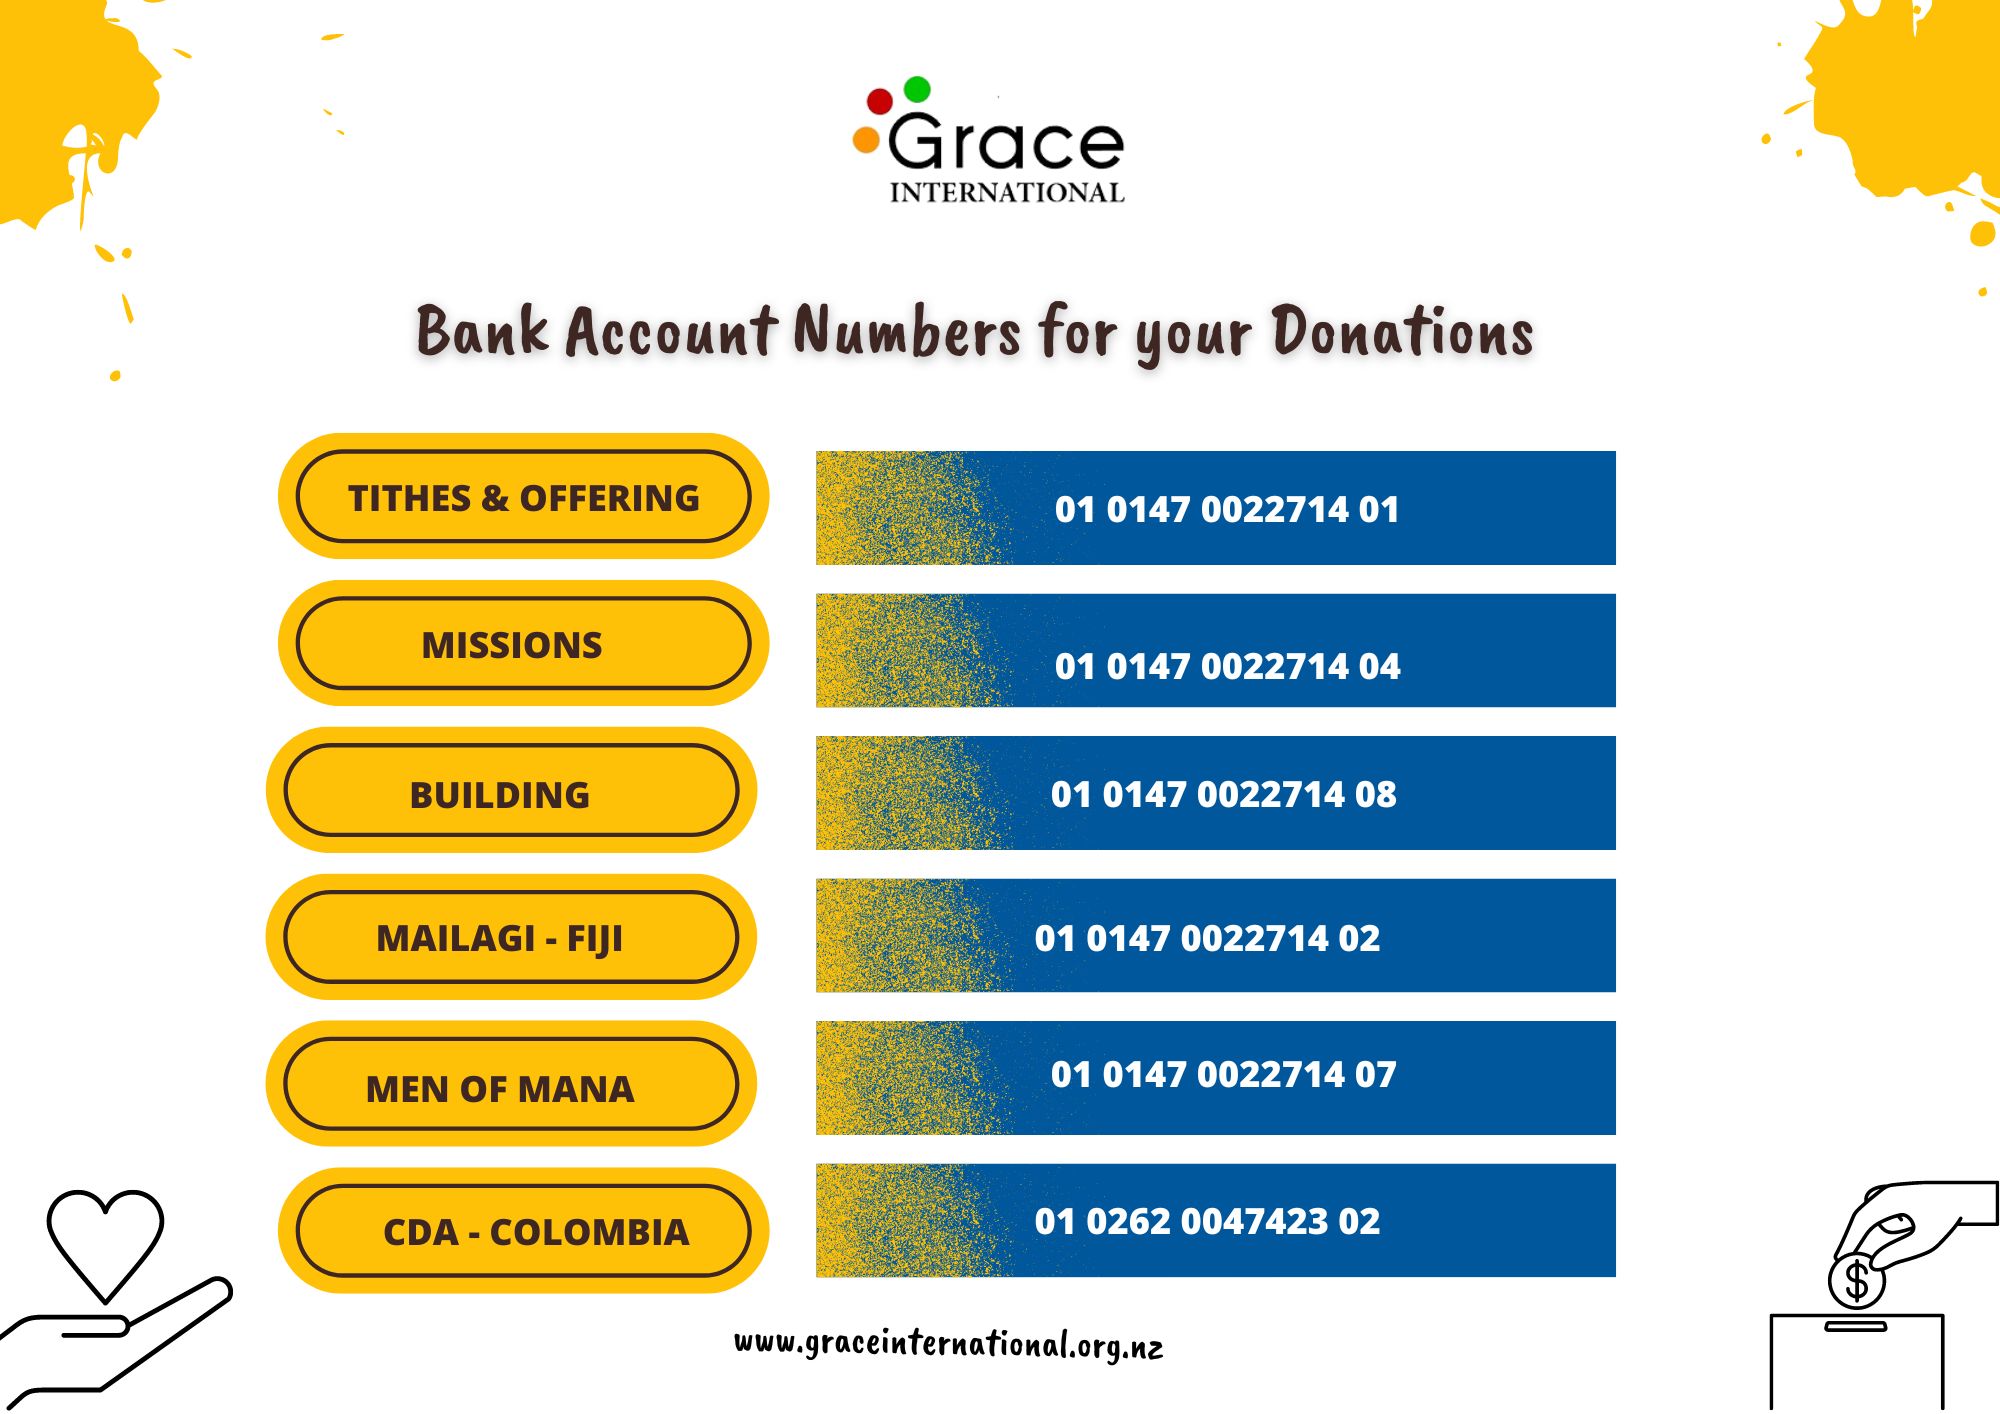 Account Numbers for Grace International Giving